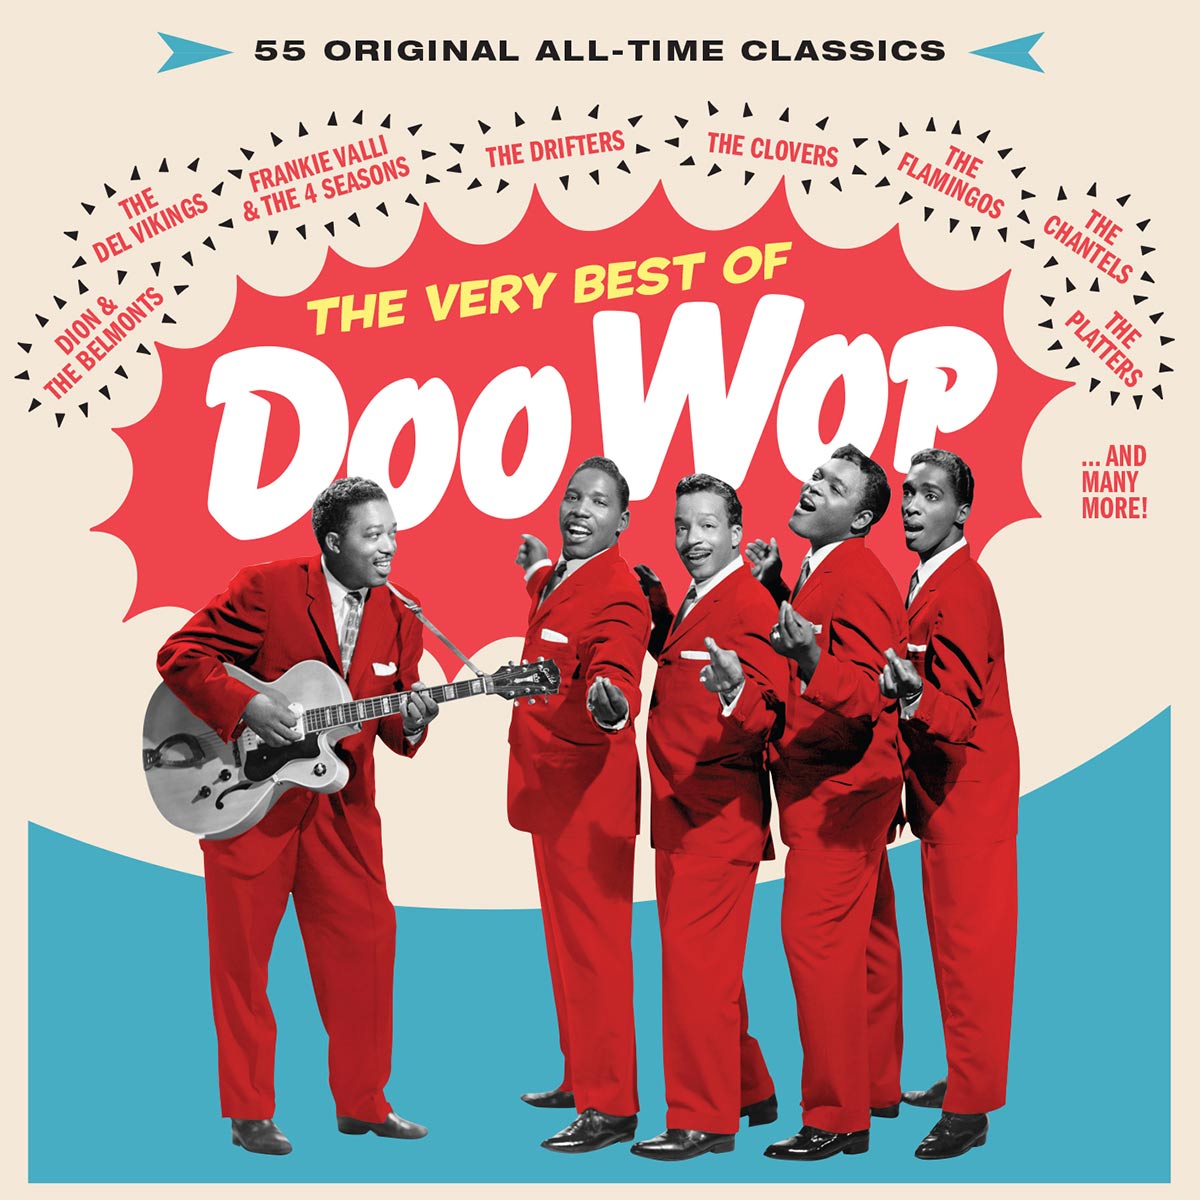 The Very Best Of Doo Wop - 55 Original All-Time Classics